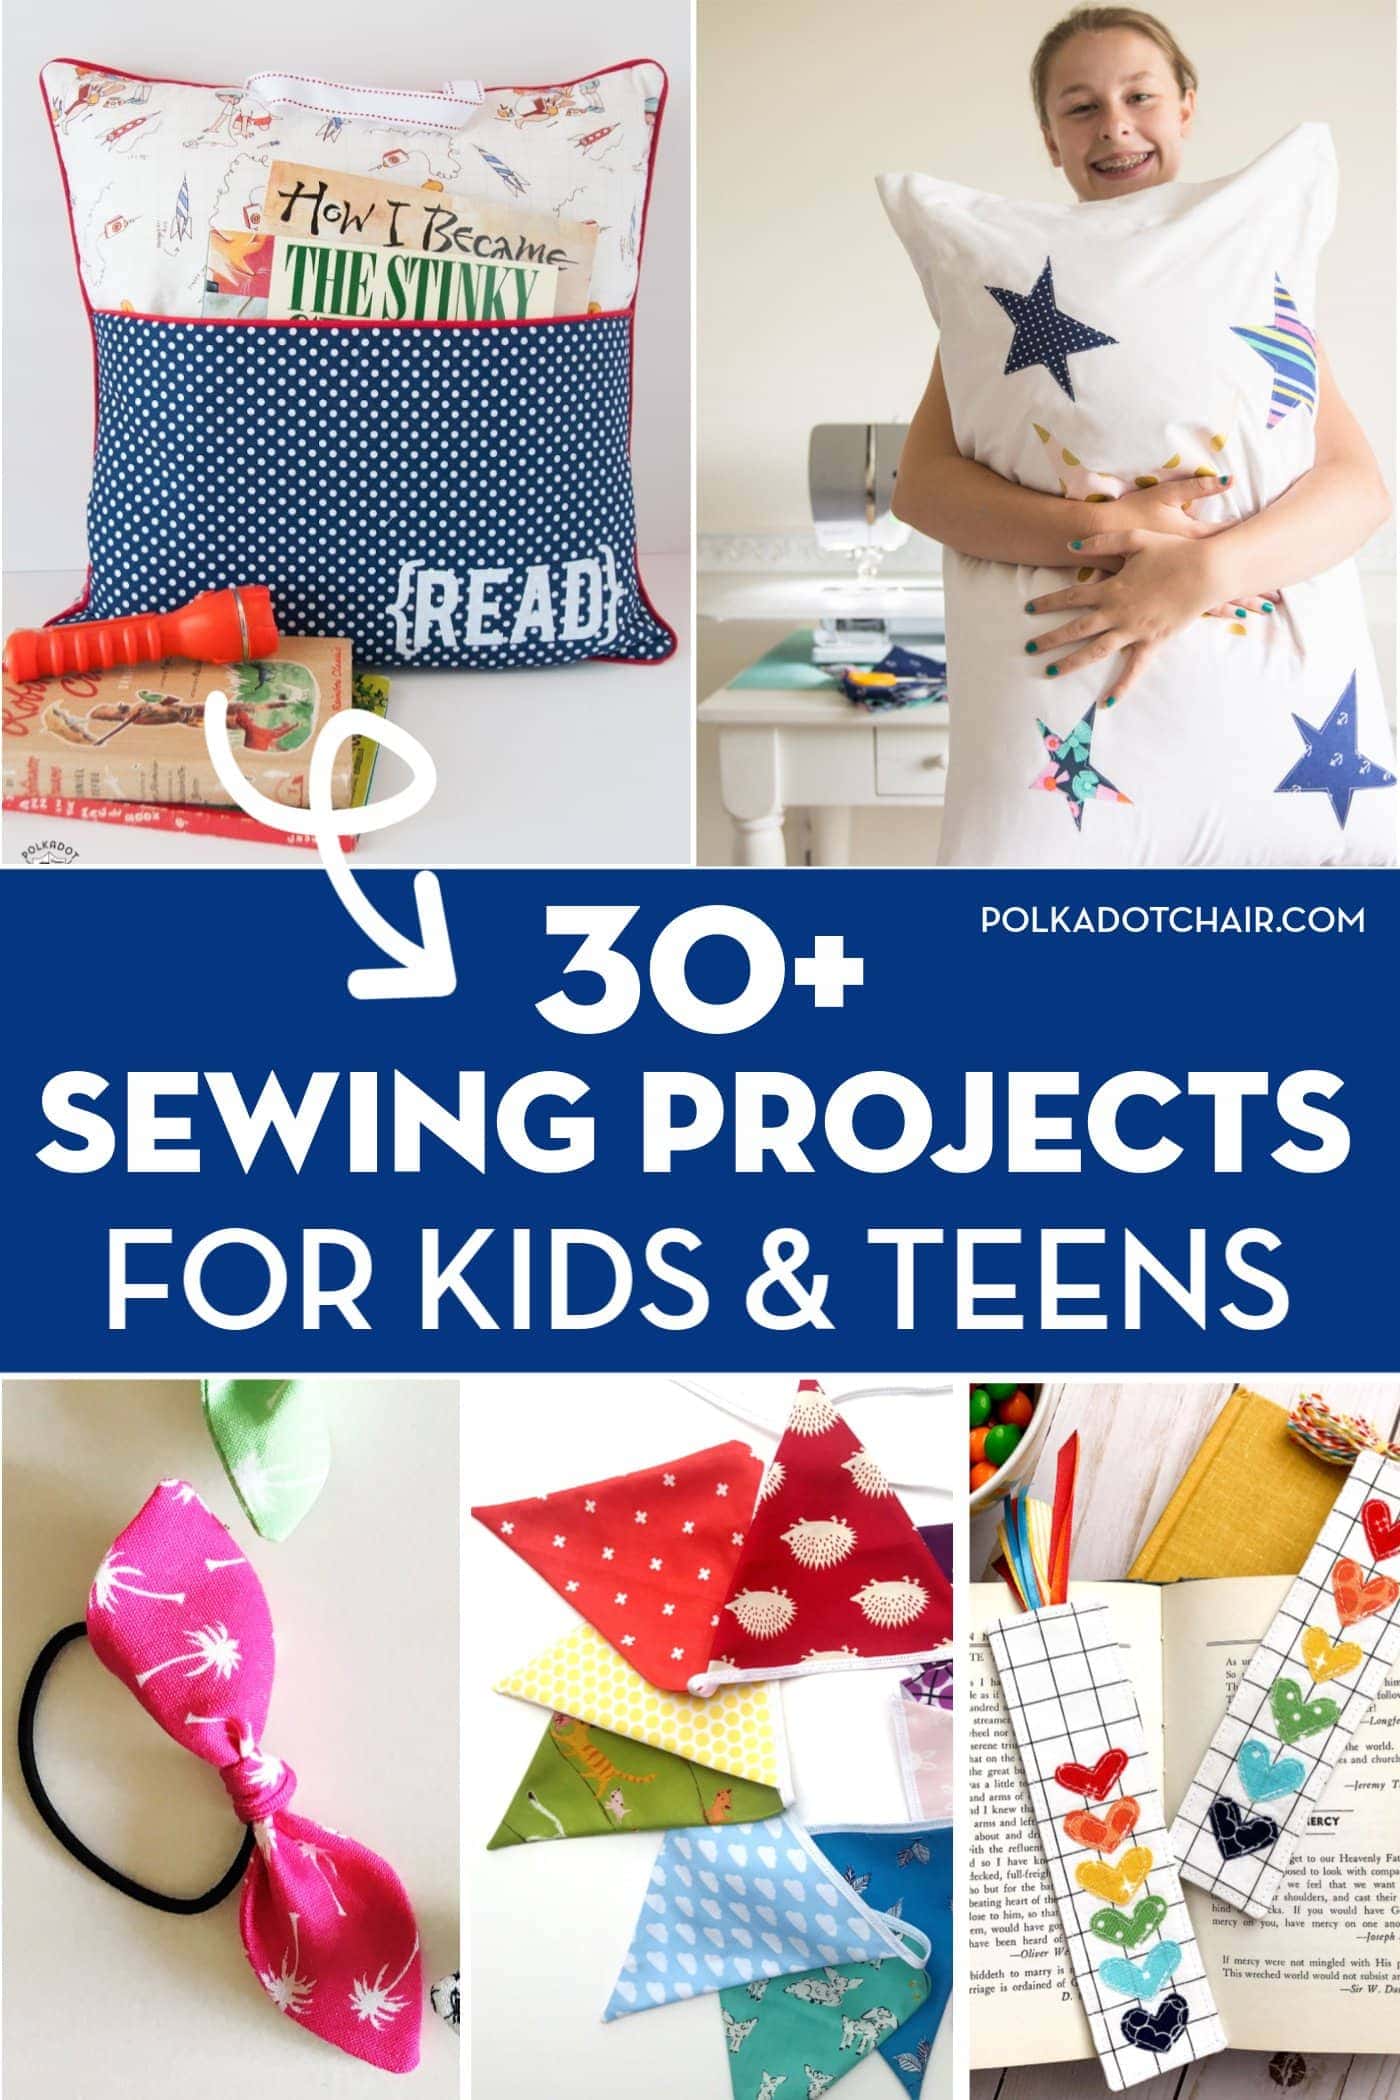 30+ Free Bag Sewing Patterns - Crazy Little Projects